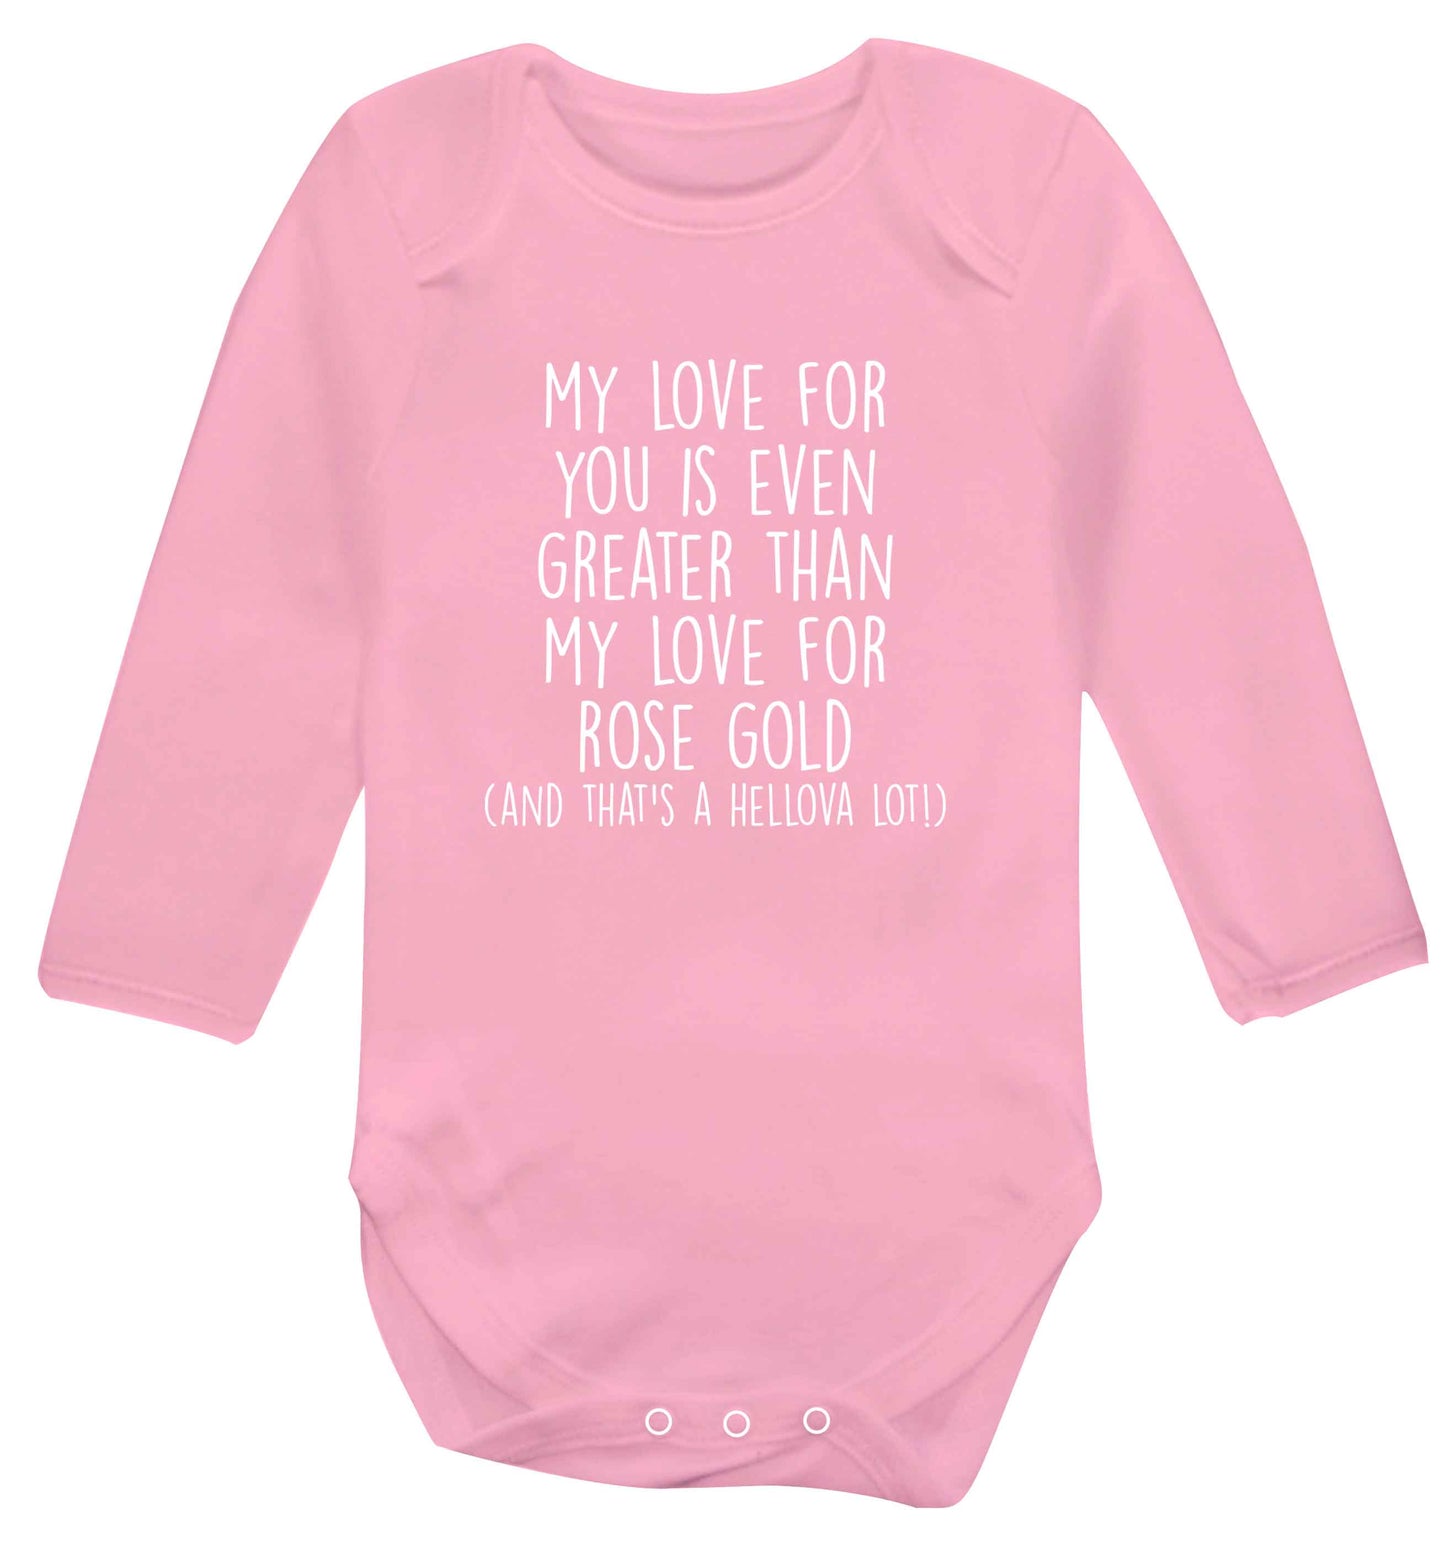 My love for you is even greater than my love for rose gold (and that's a hellova lot) baby vest long sleeved pale pink 6-12 months